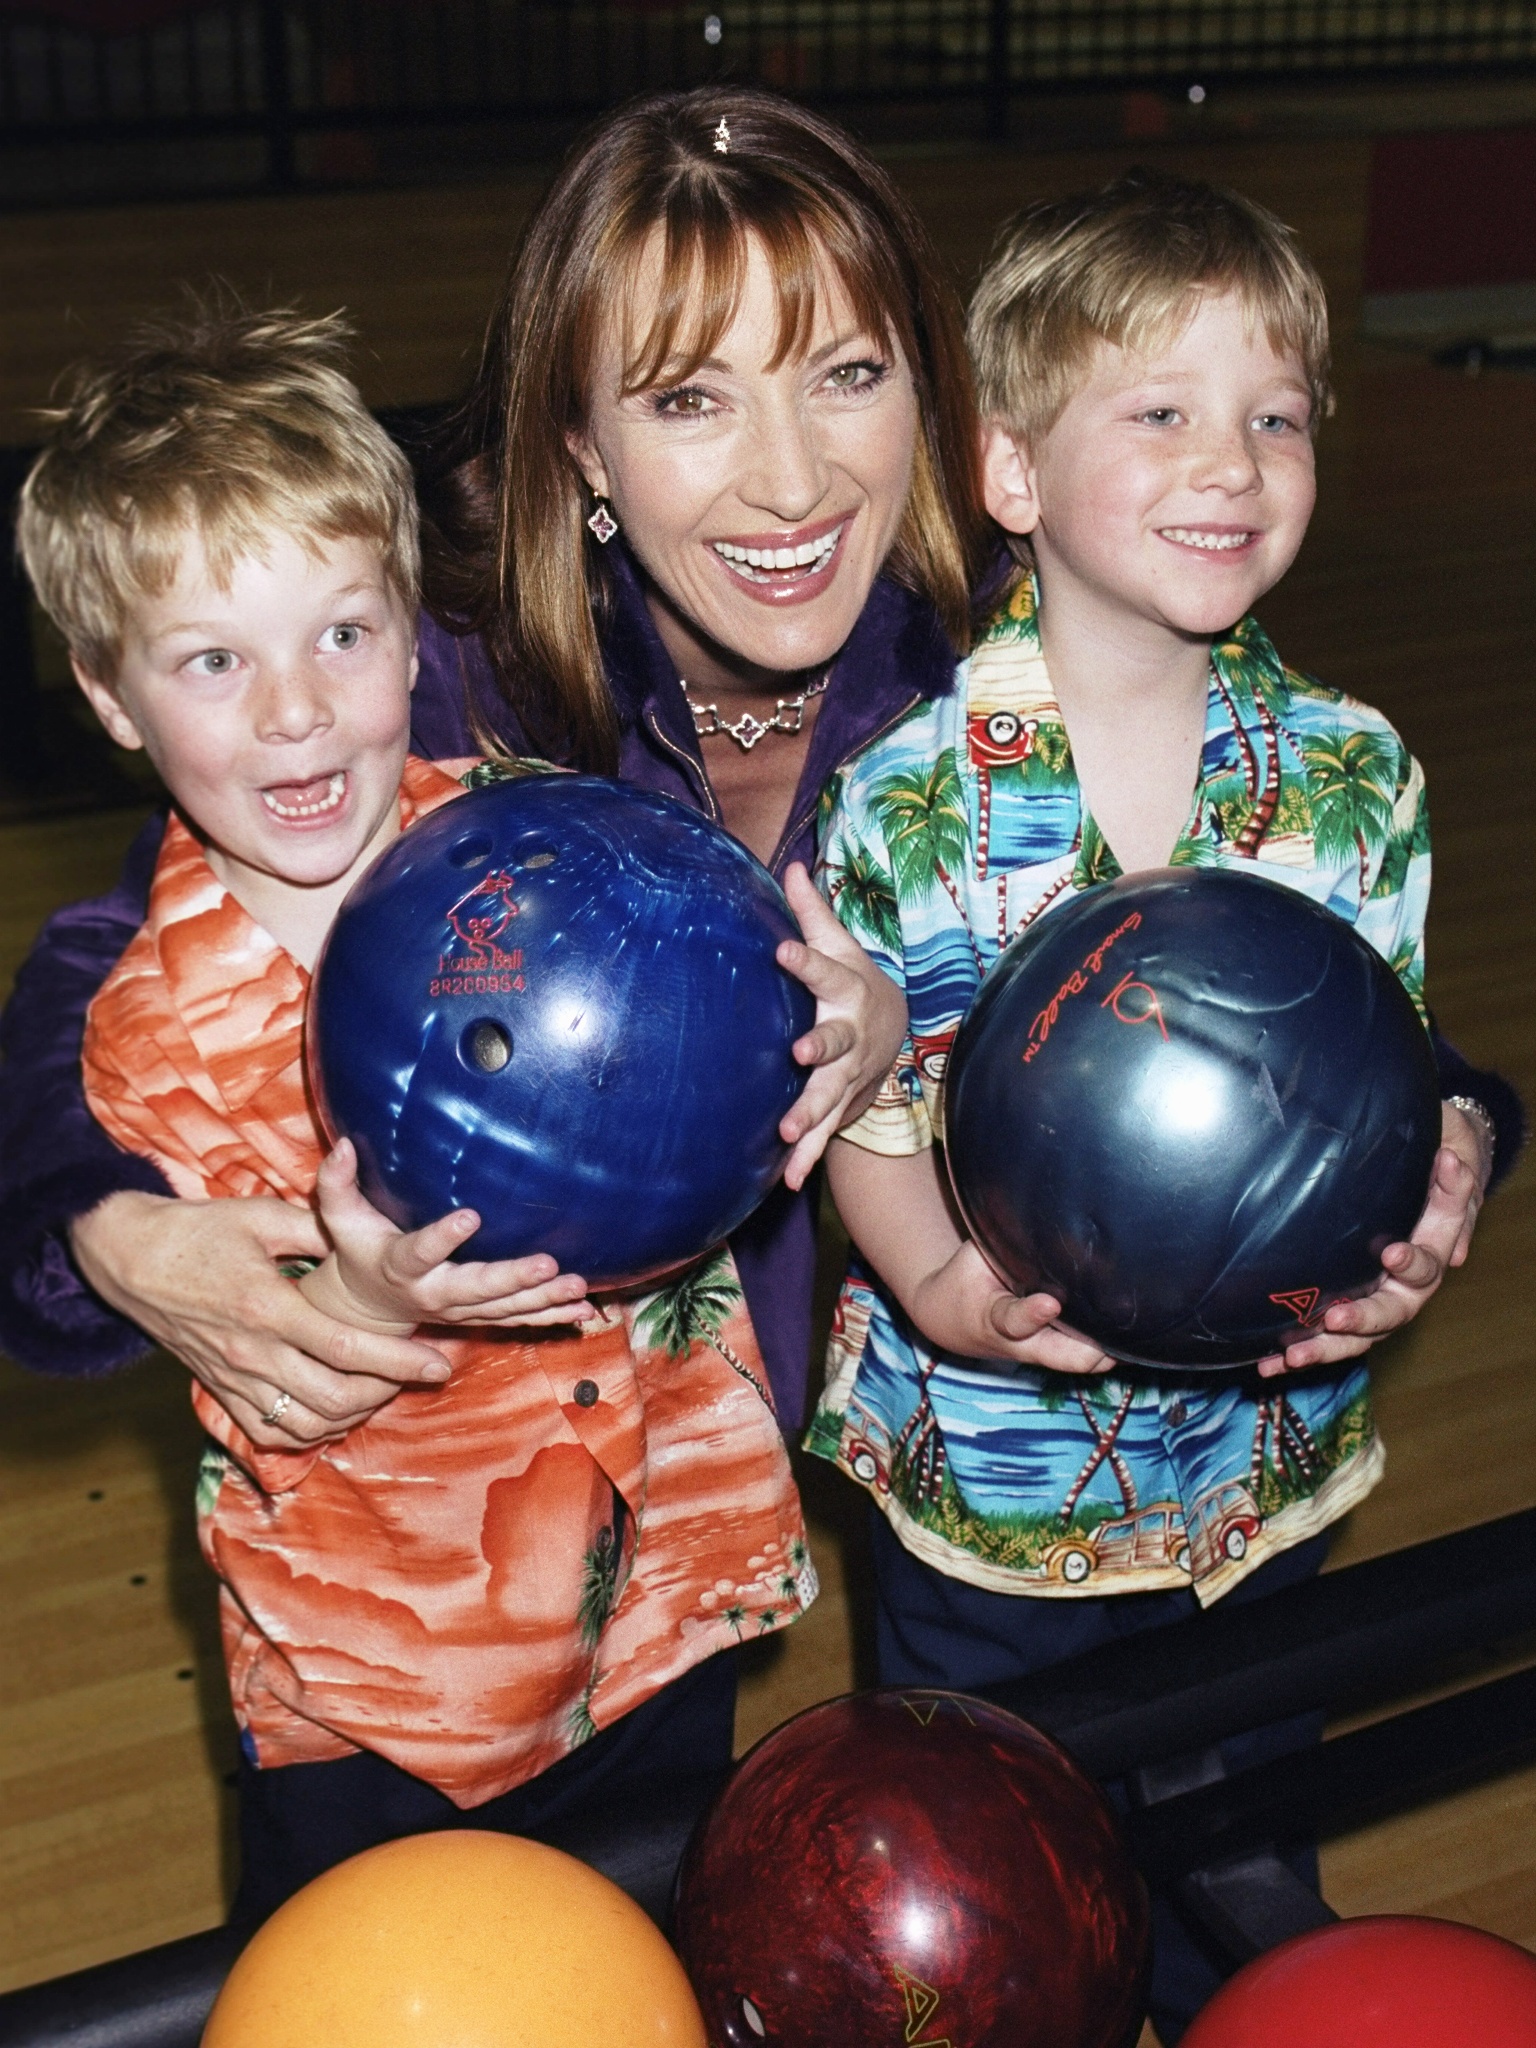 Jane Seymour, John and Kristopher Keach, at the third annual Bowling Ball at AMF Chelsea Piers on January 1, 2000 | Source: Getty Images